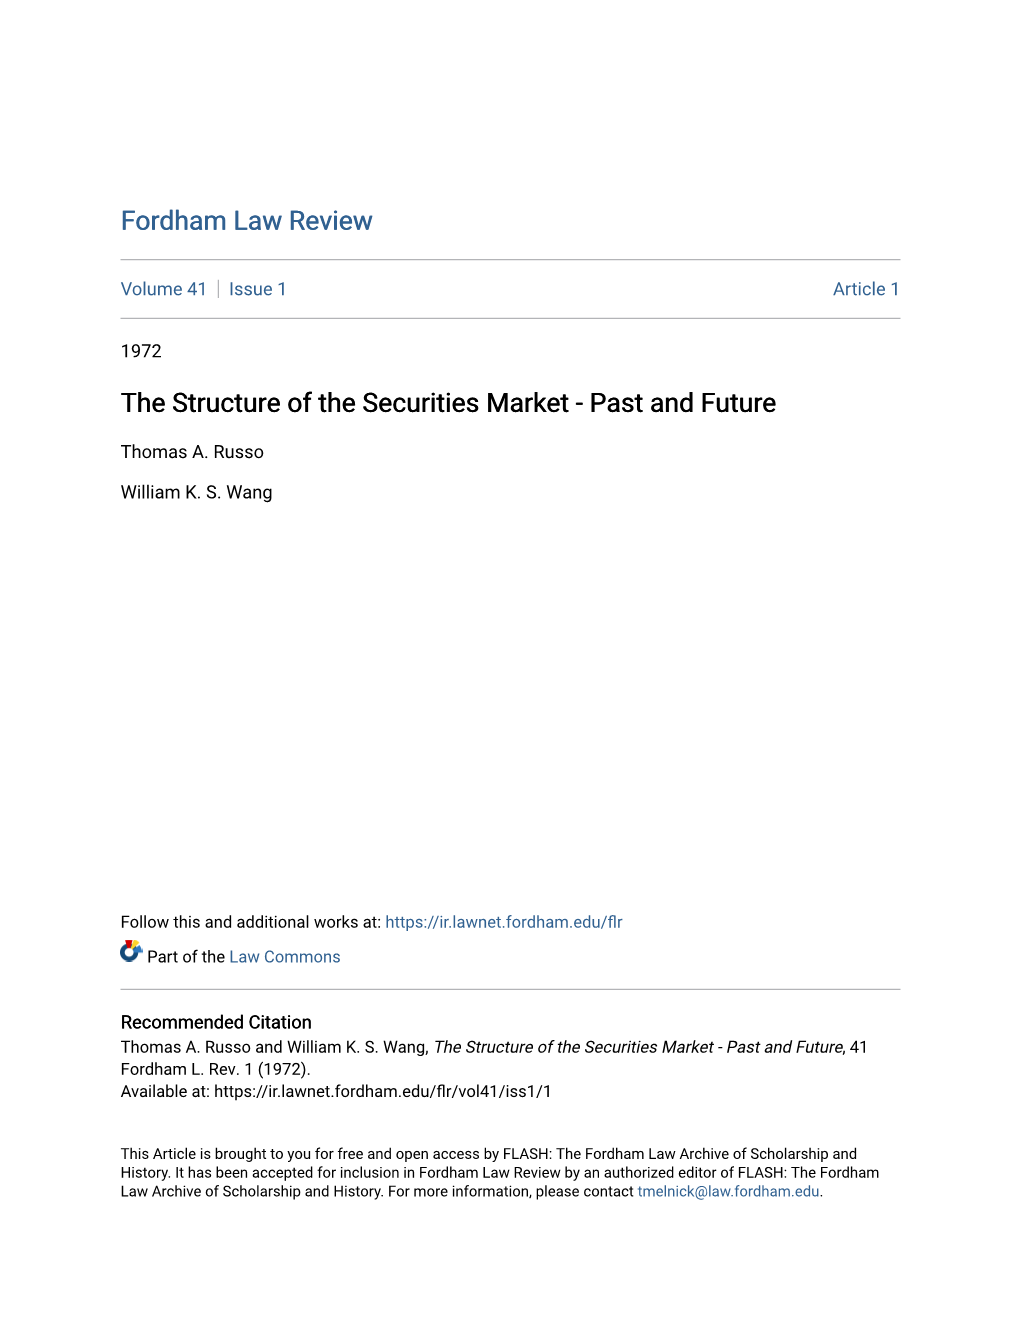 The Structure of the Securities Market - Past and Future